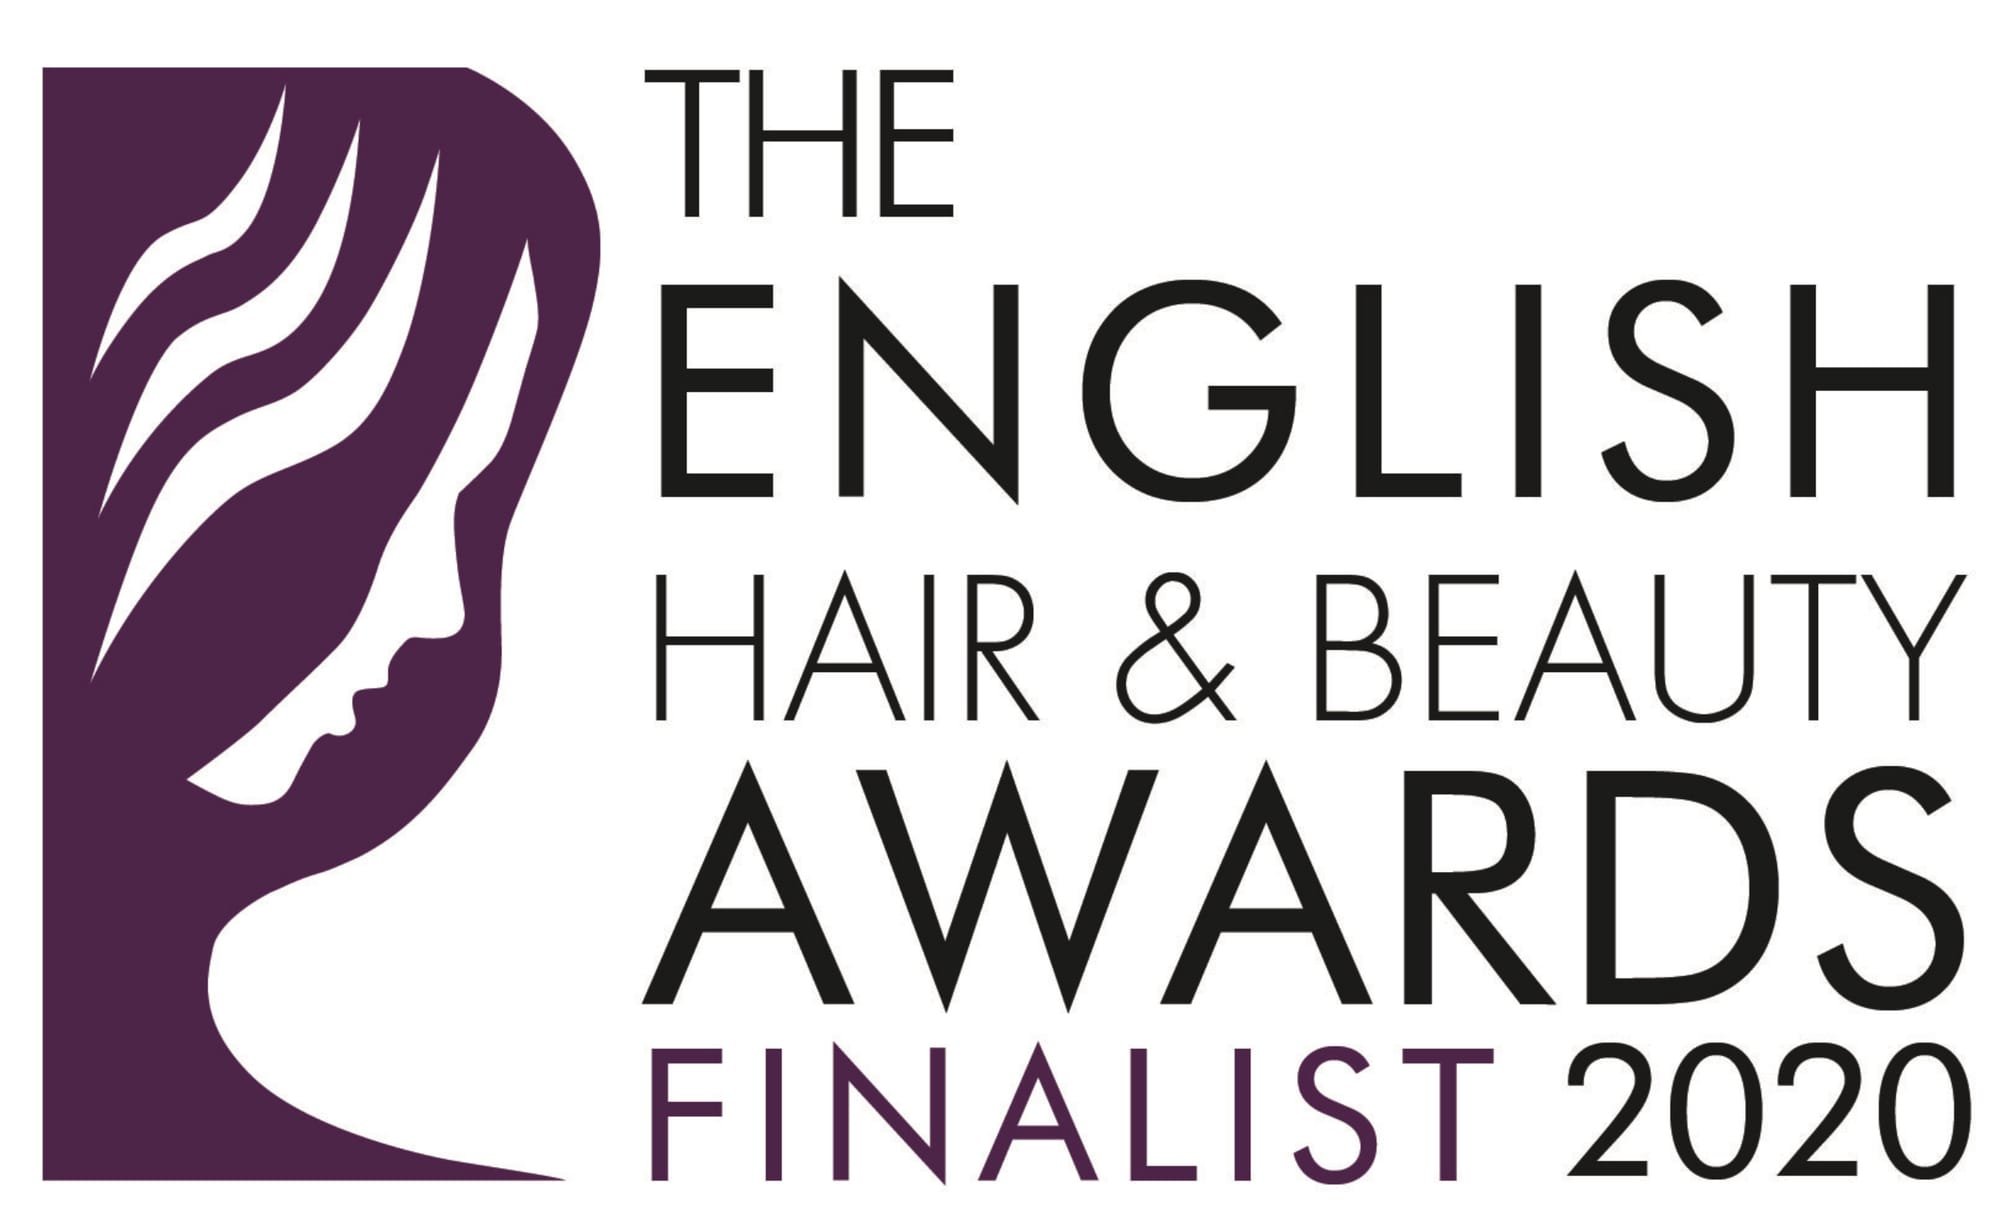 The English Hair and Beauty Awards Finalist 2020